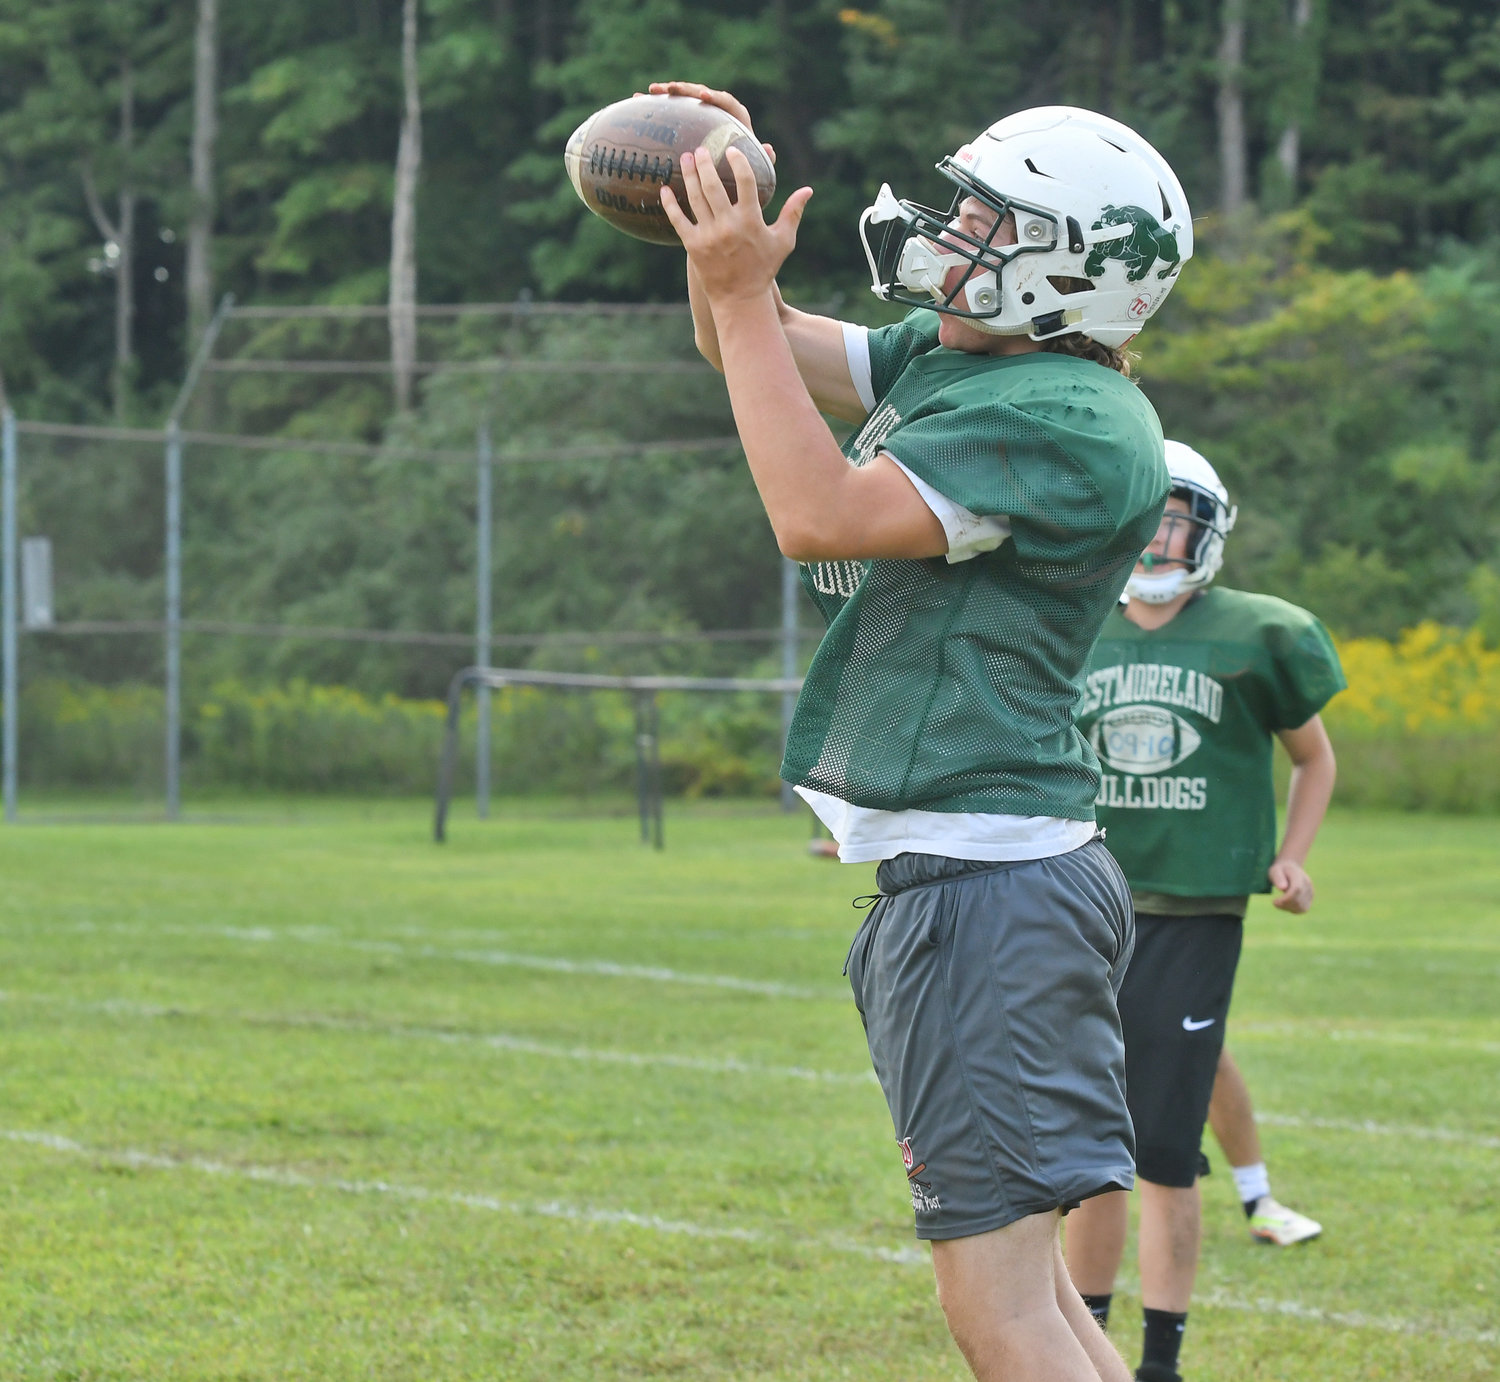 Westmoreland/Oriskany senior defensive end Mitchell Holmes makes an interception during morning drills on Aug. 25.